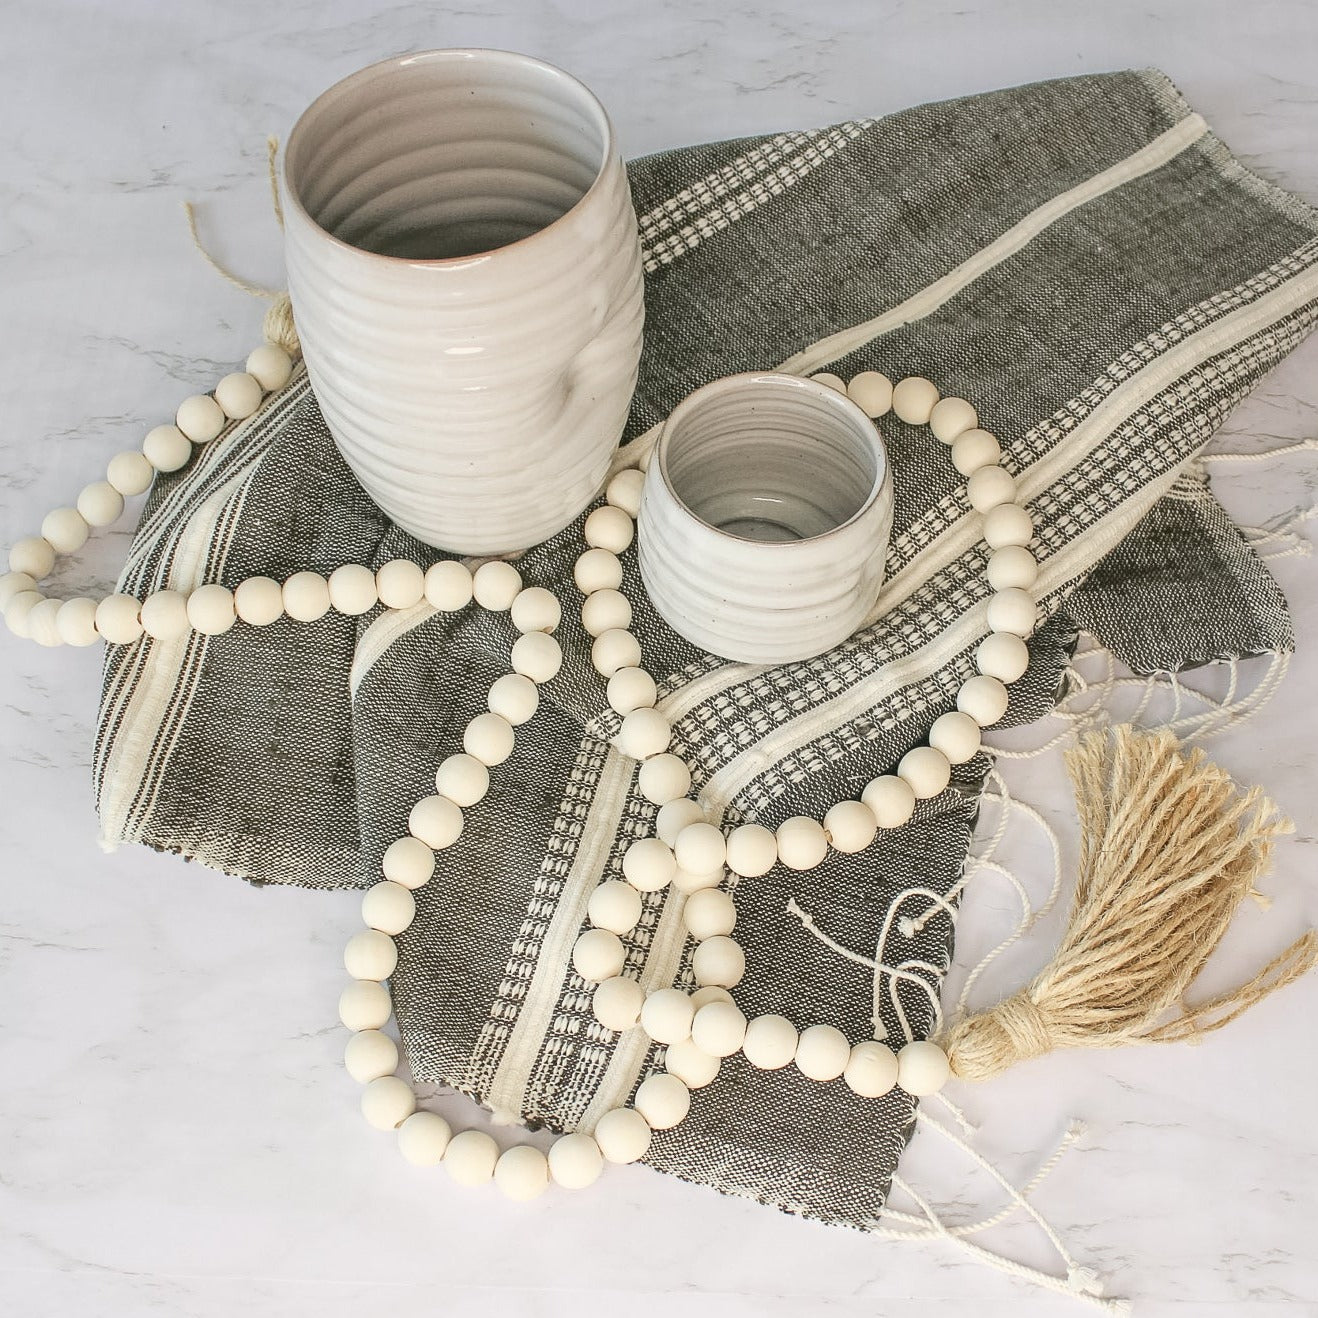 On a marble countertop, sits our aden cotton hand towel. A dark grey towel with natural colored stripes and fringe of the ends. On the towel, we have our tipsy tumbler and tall tumbler. Our decorative beads are draped over the towel. 